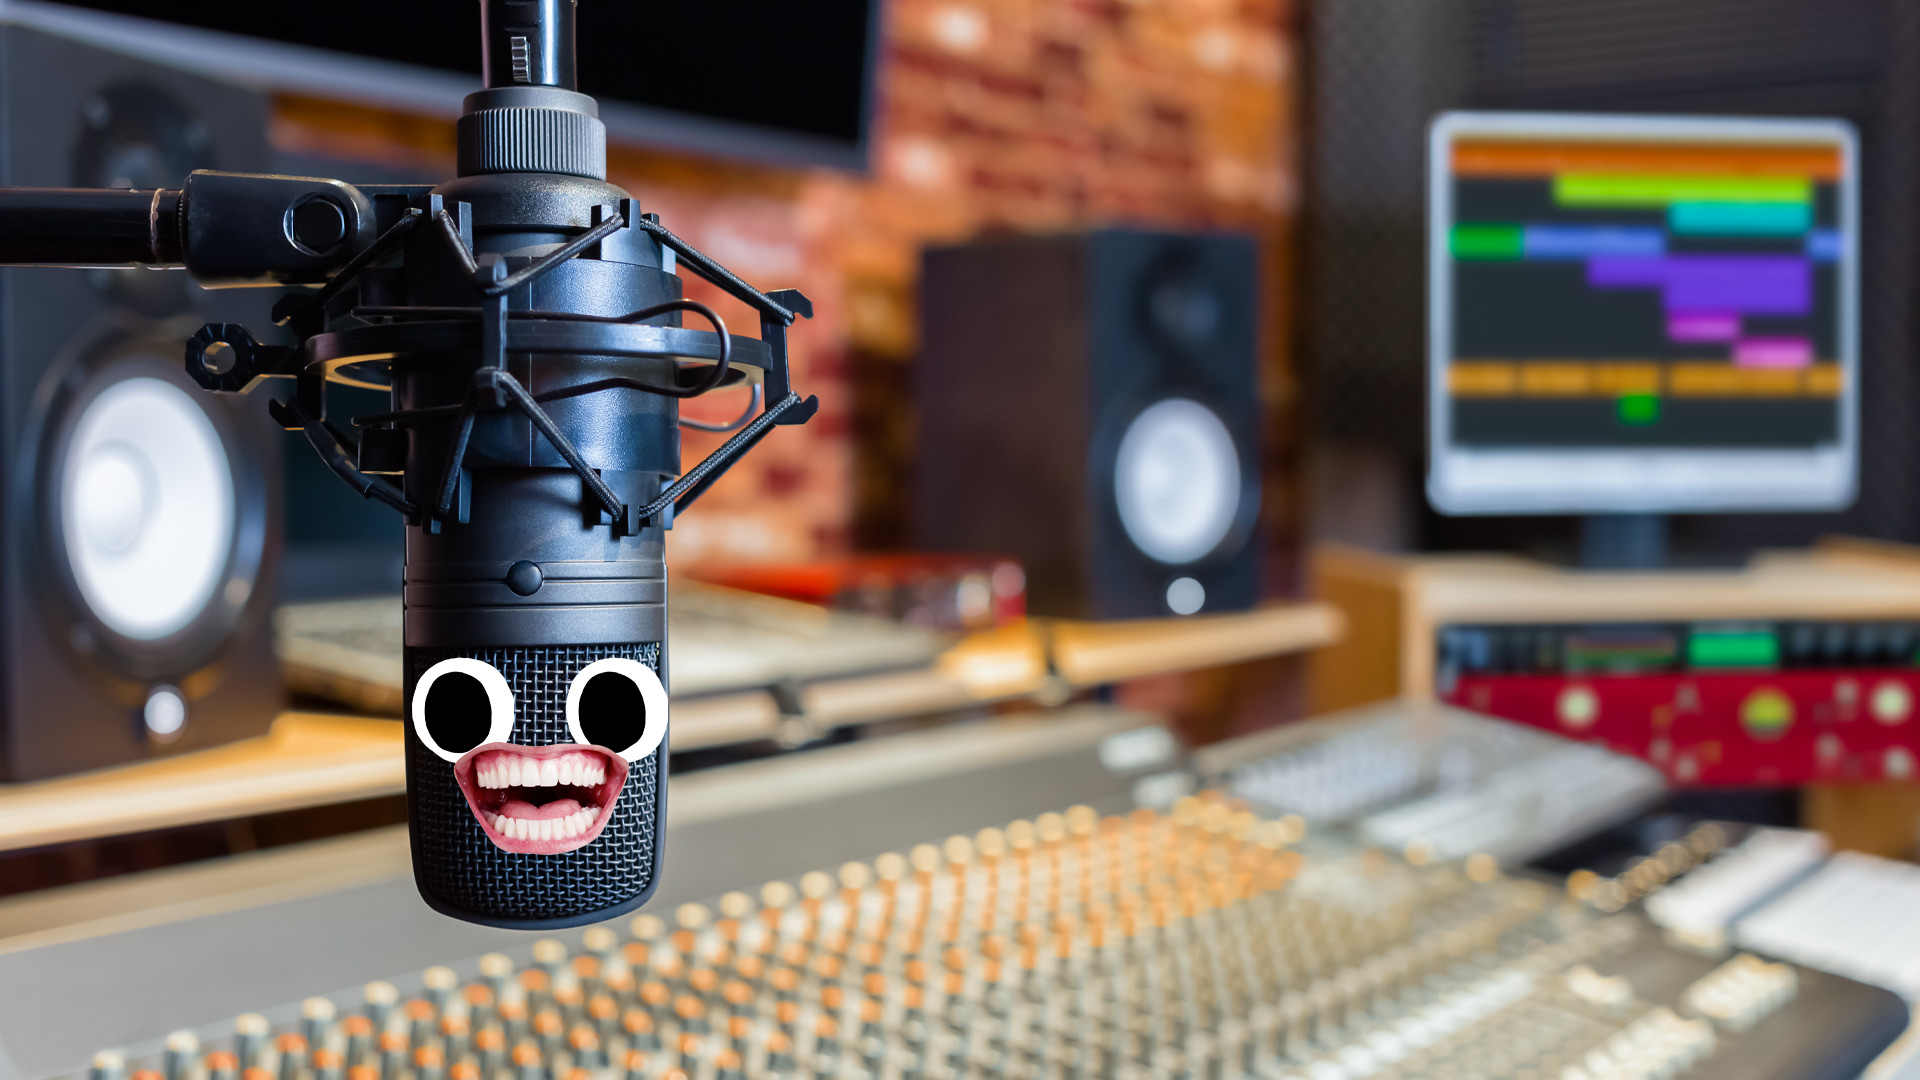 A happy microphone